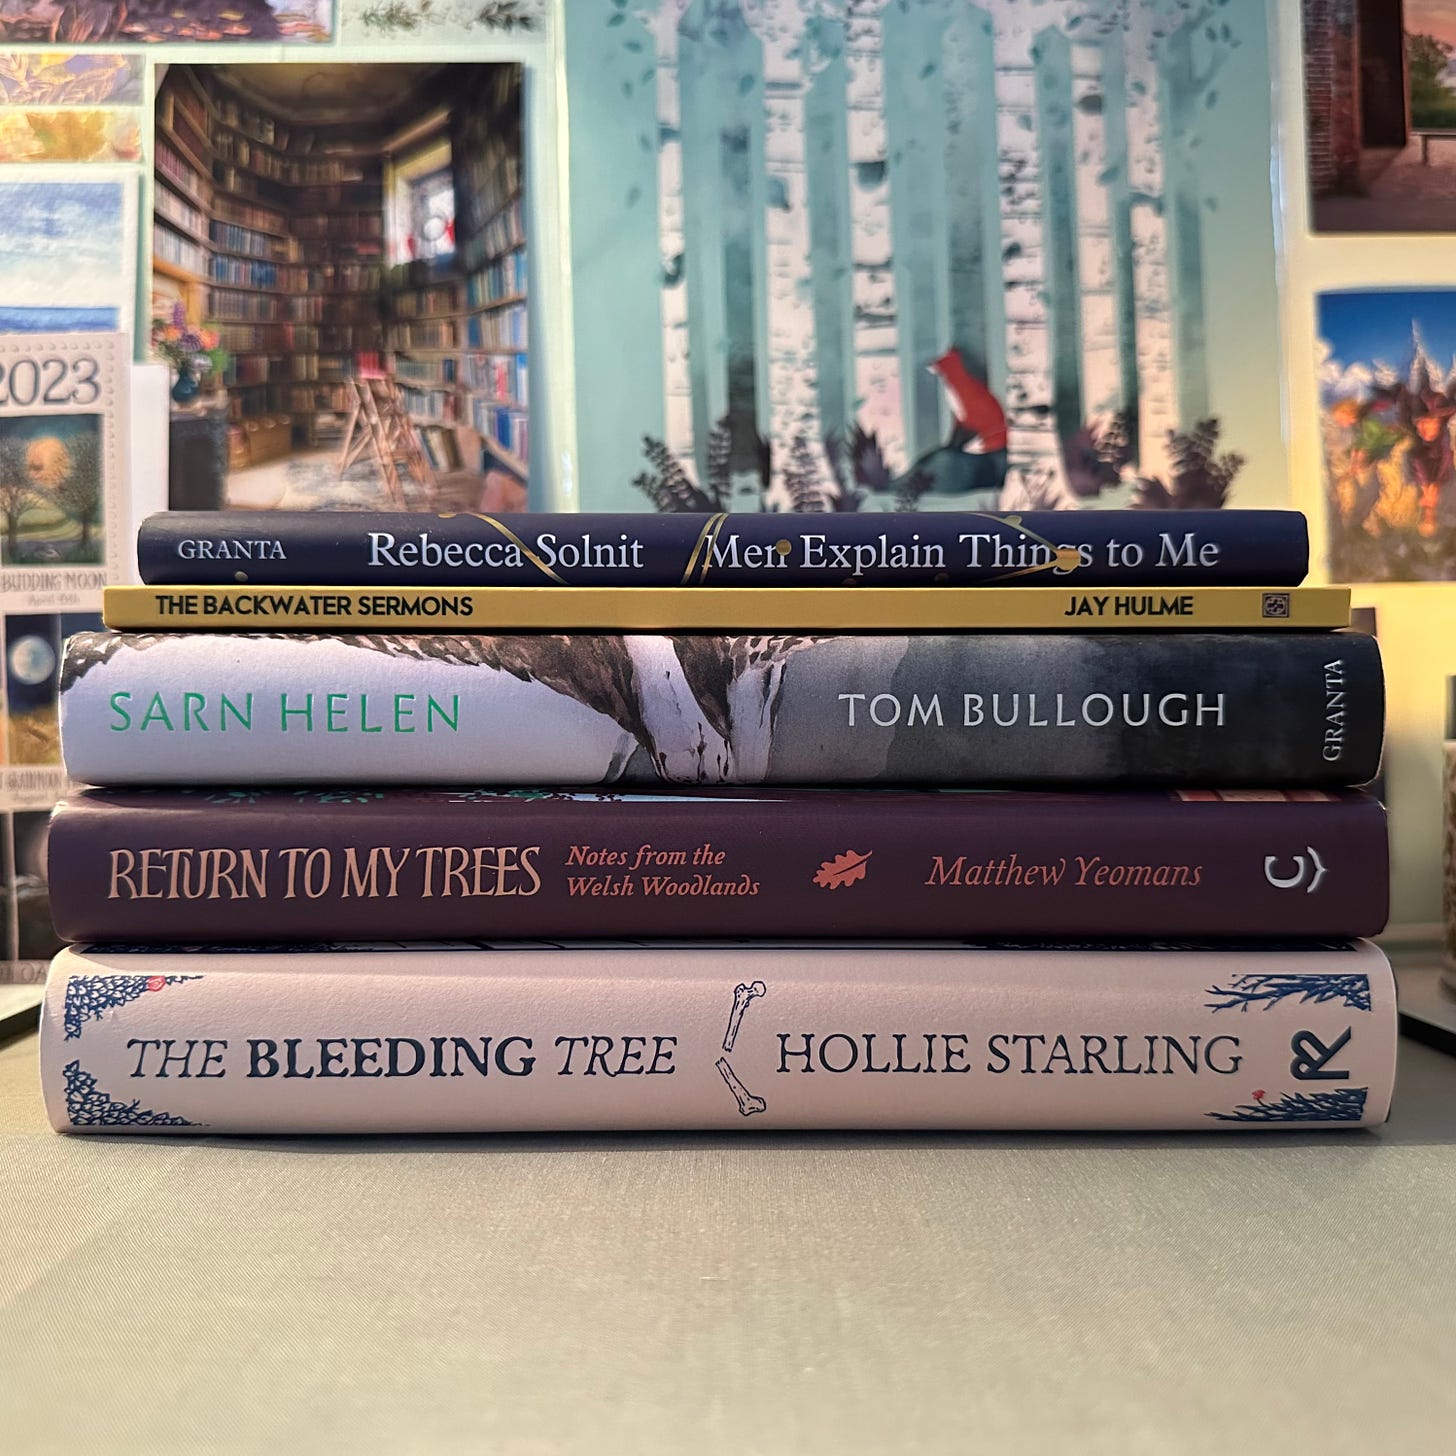 Pile of books from top to bottom: Rebecca Solnit Men Explain Things to Me, Jay Hulme's The Backwater Sermons, Tom Bullough's Sarn Helen, Matthew Yeoman's Return to my Trees, Hollie Starling's The Bleeding Tree